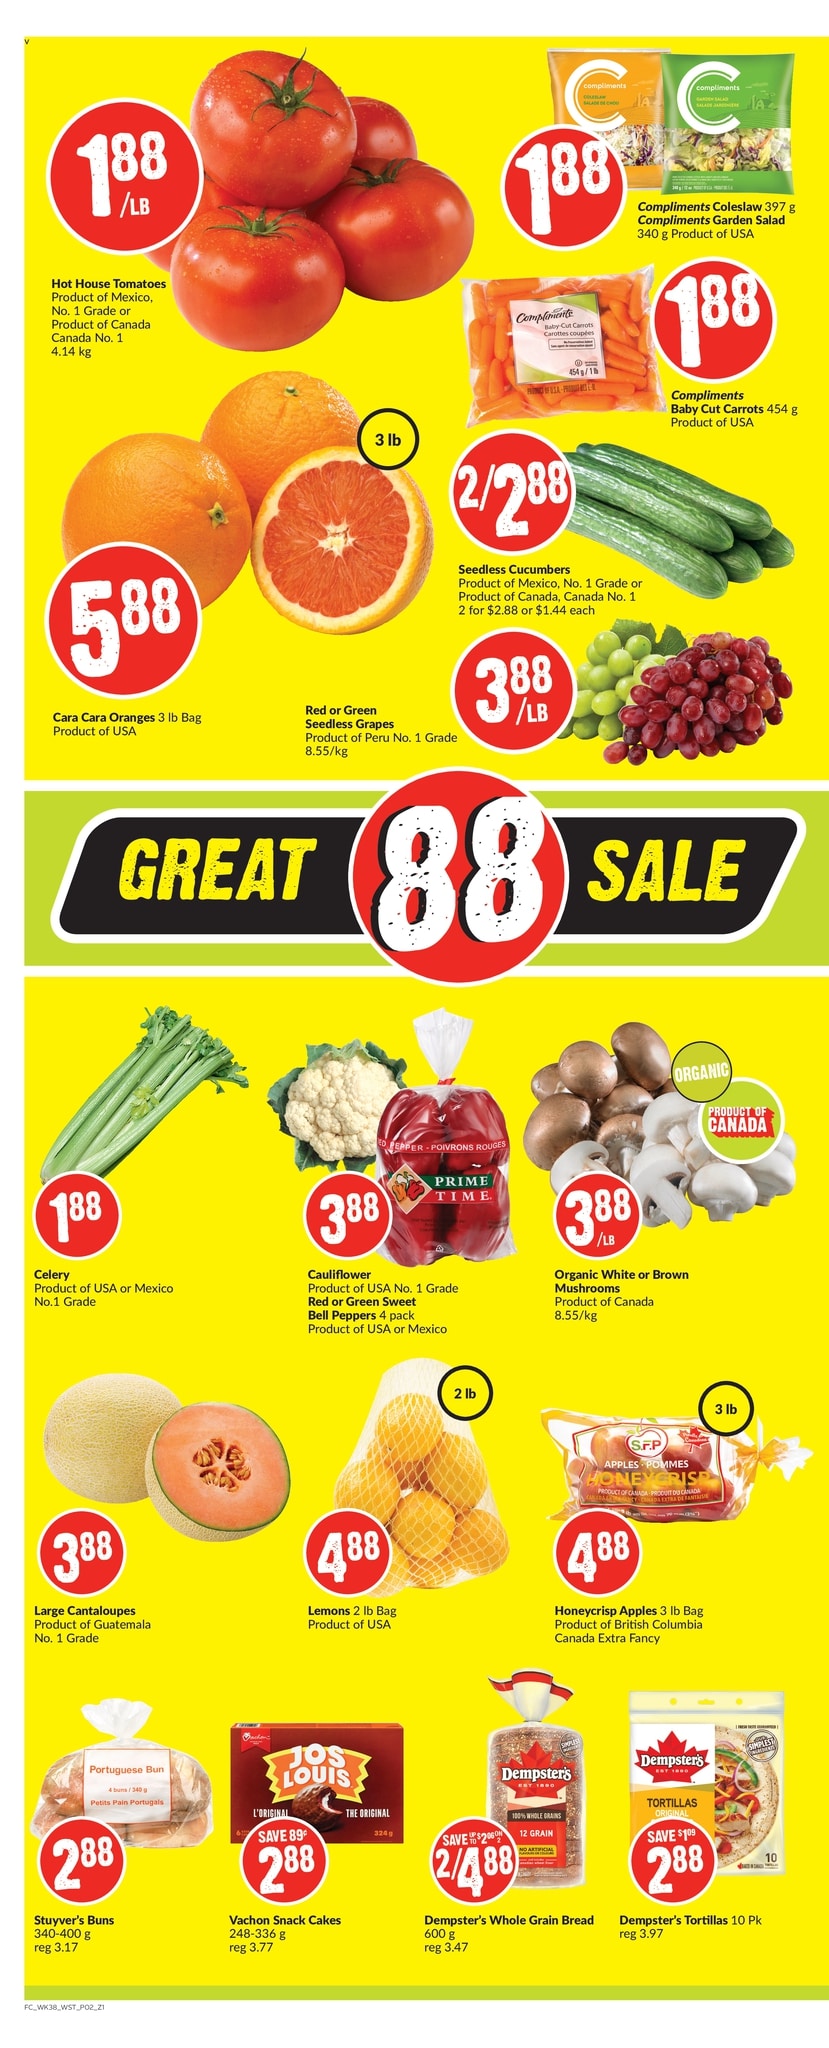 FreshCo British Columbia - Weekly Flyer Specials - Page 3